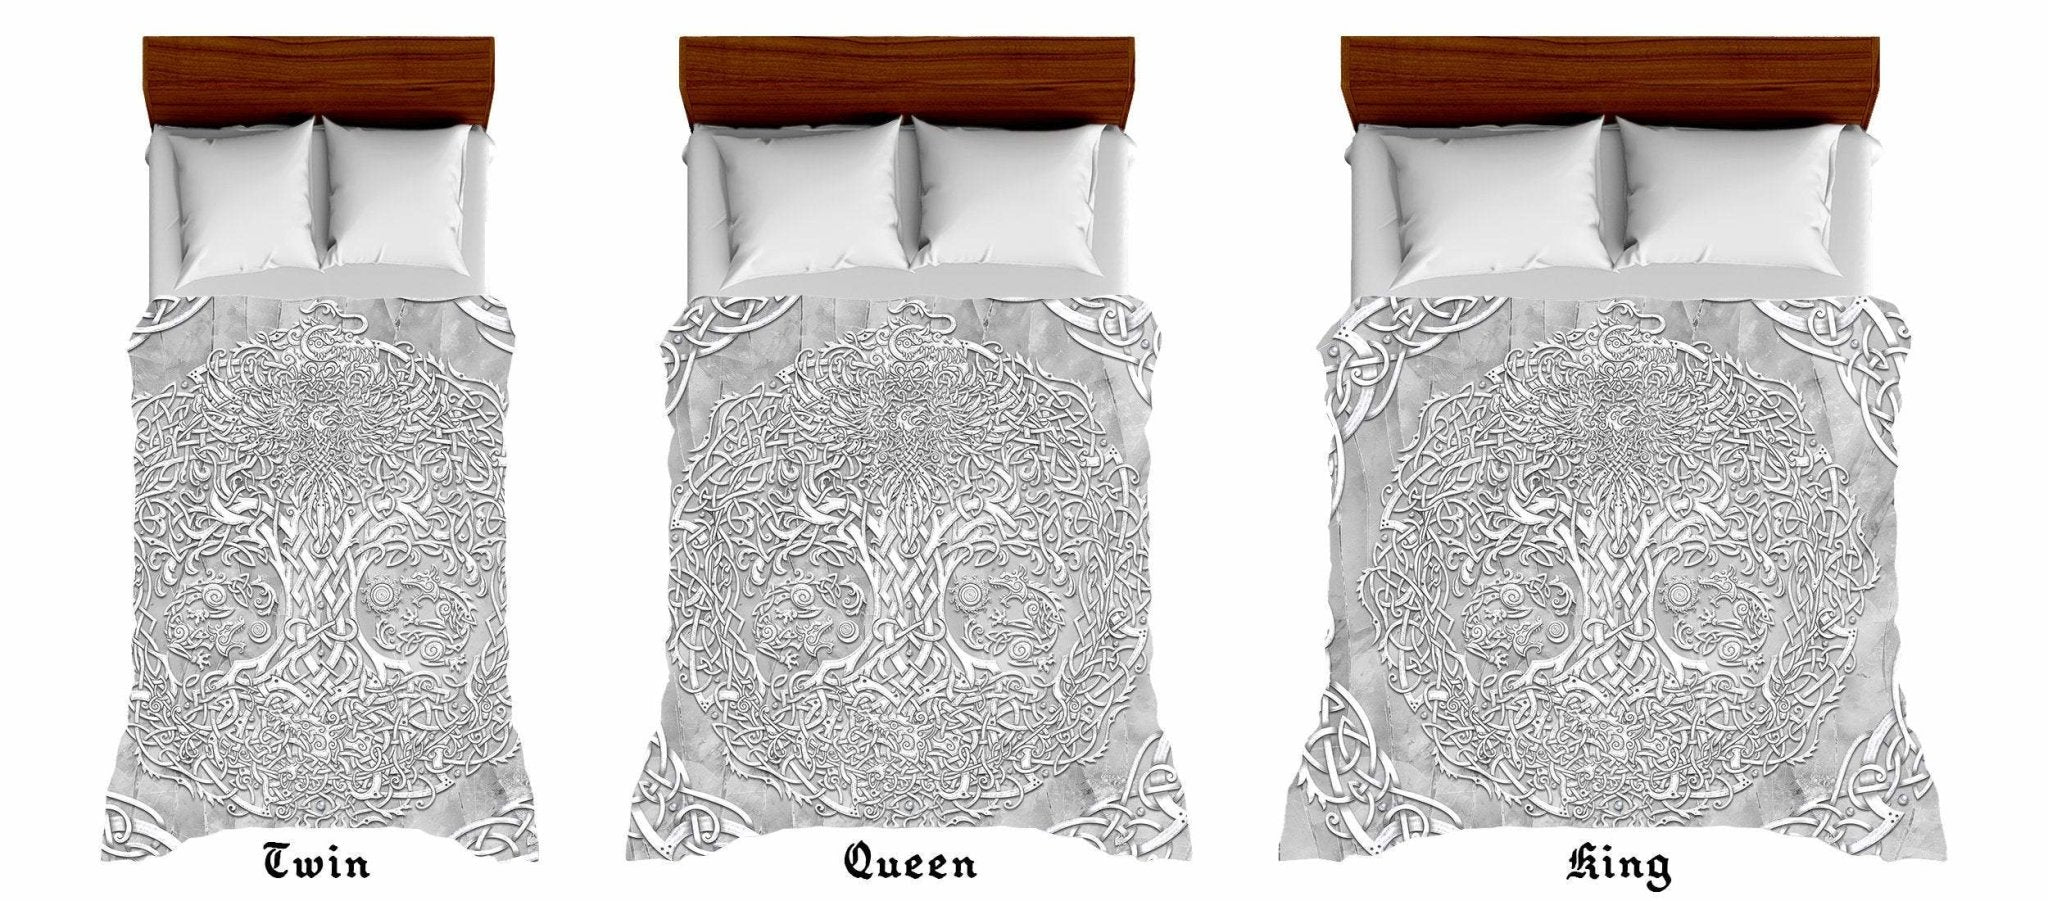 Yggdrasil Bedding Set, Comforter and Duvet, Viking Tree of Life, Norse Bed Cover and Bedroom Decor, King, Queen and Twin Size - Stone - Abysm Internal